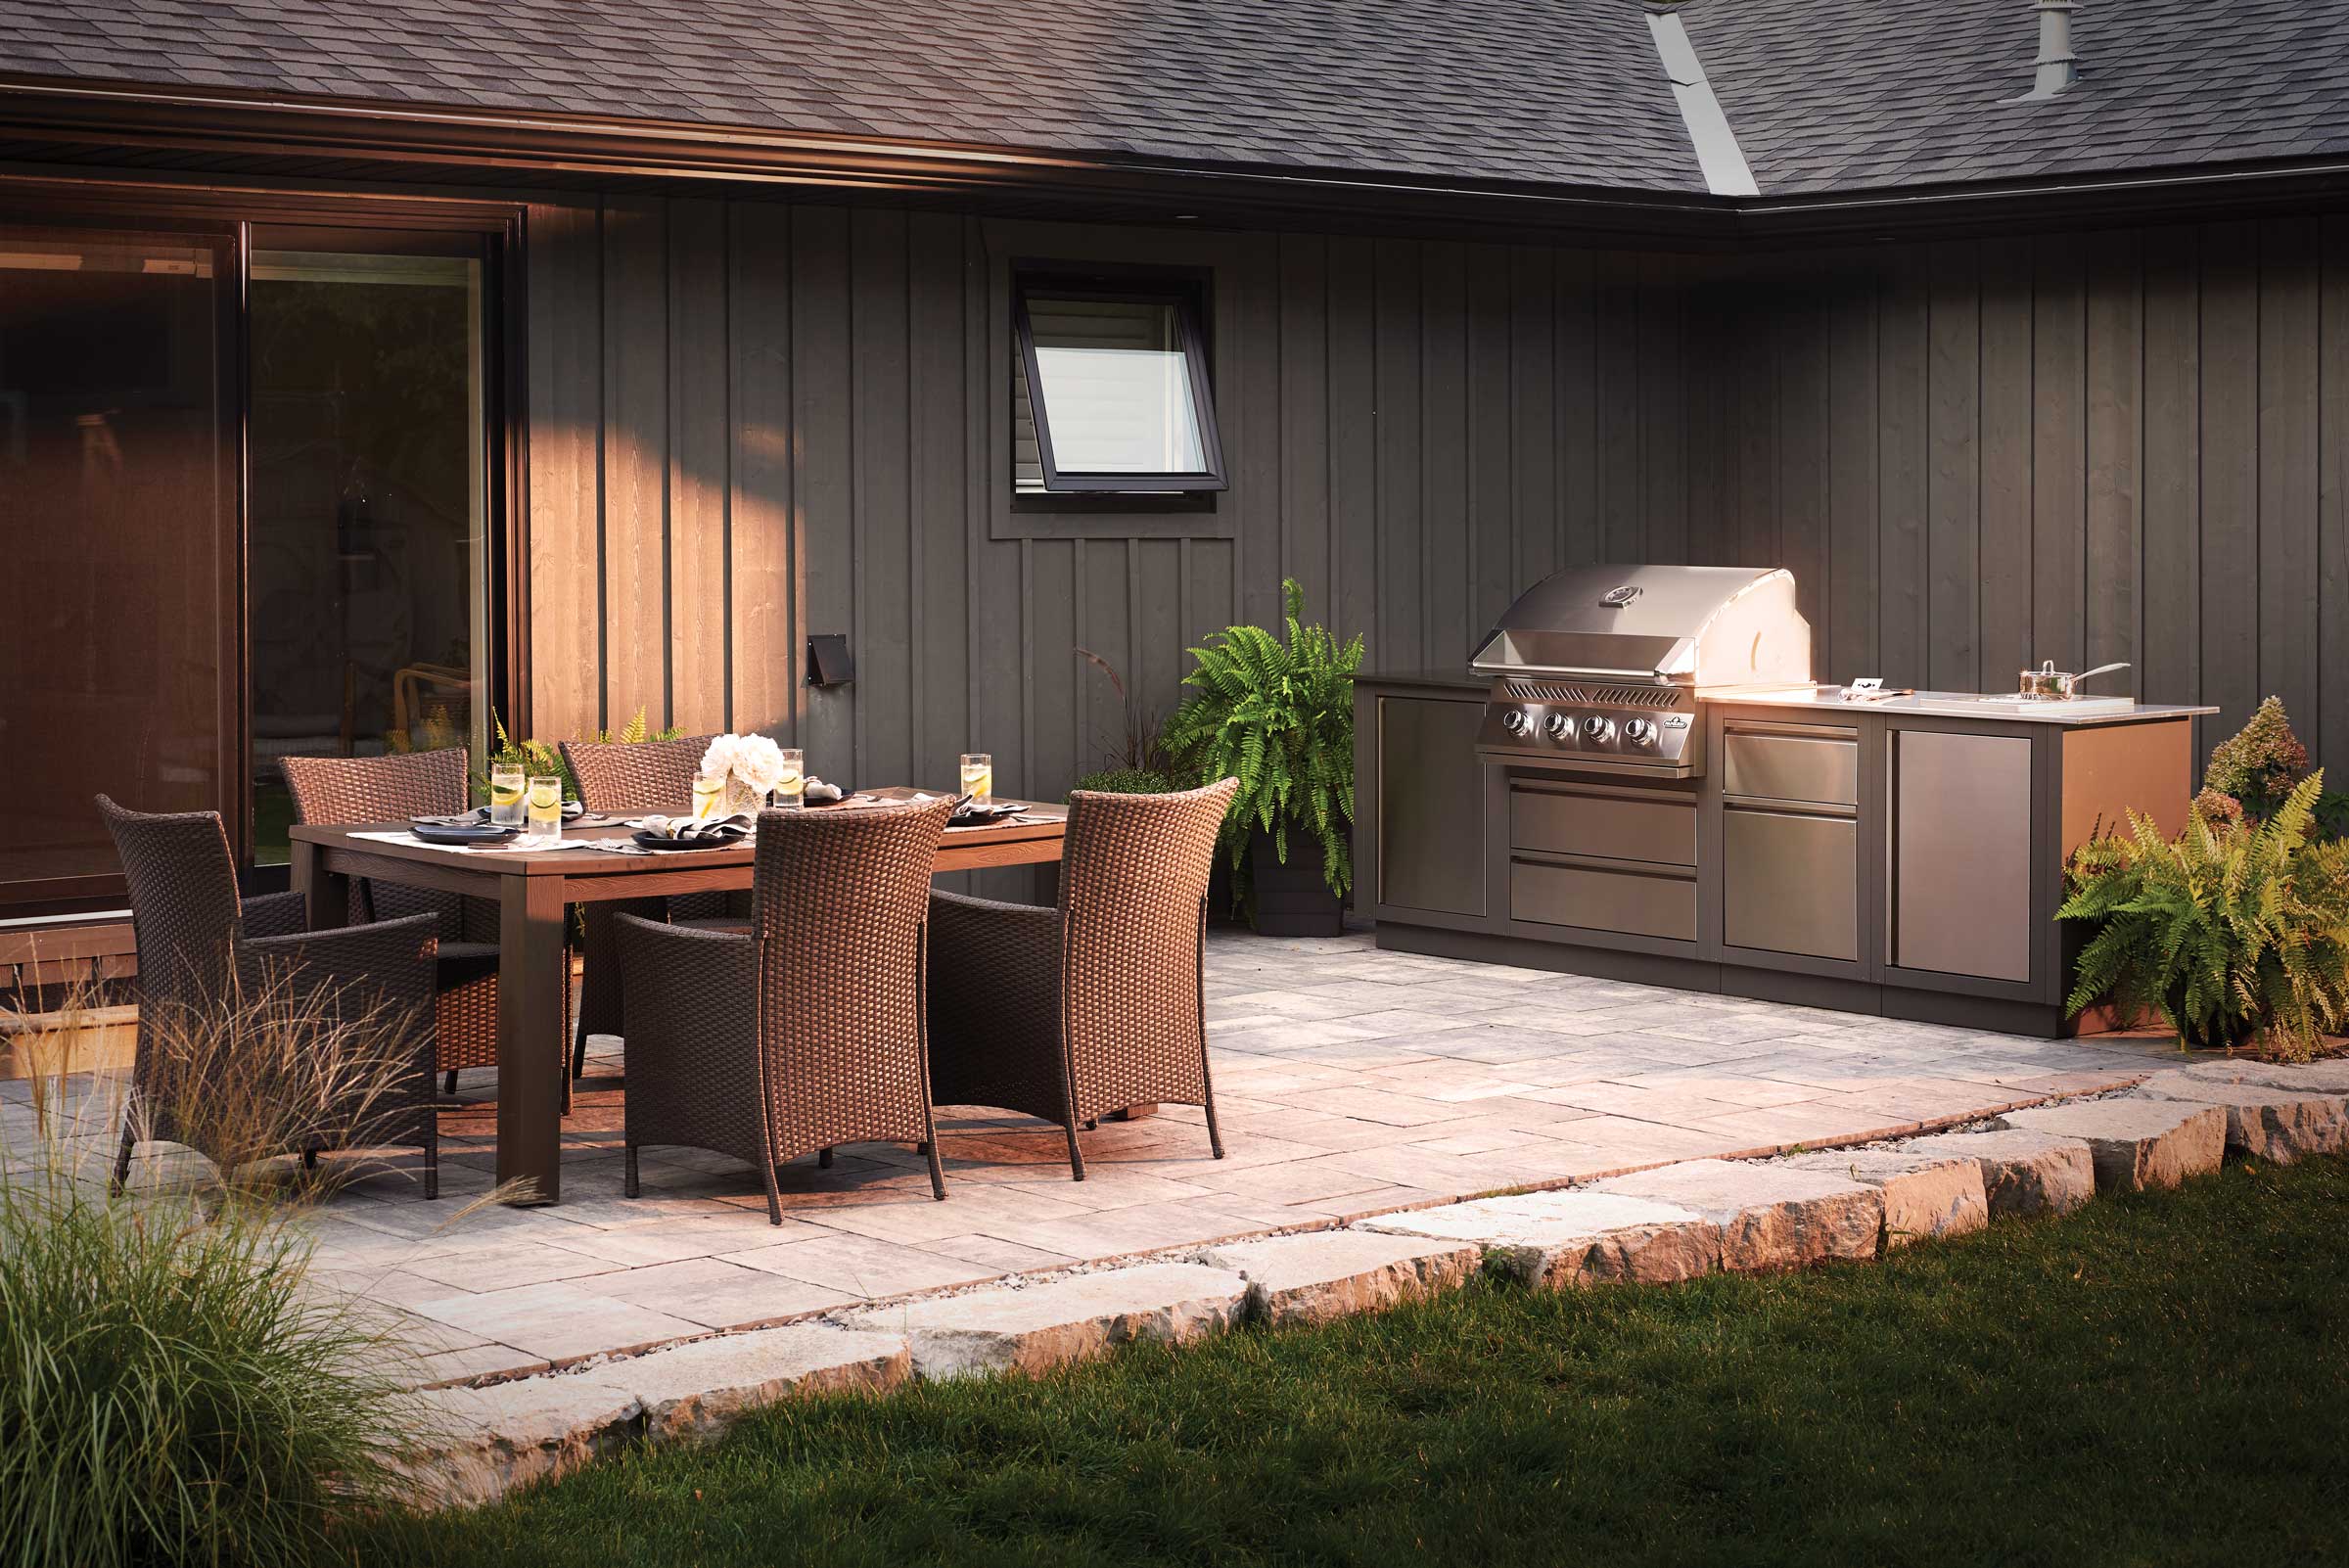 Built-in style Napoleon grill on outdoor patio